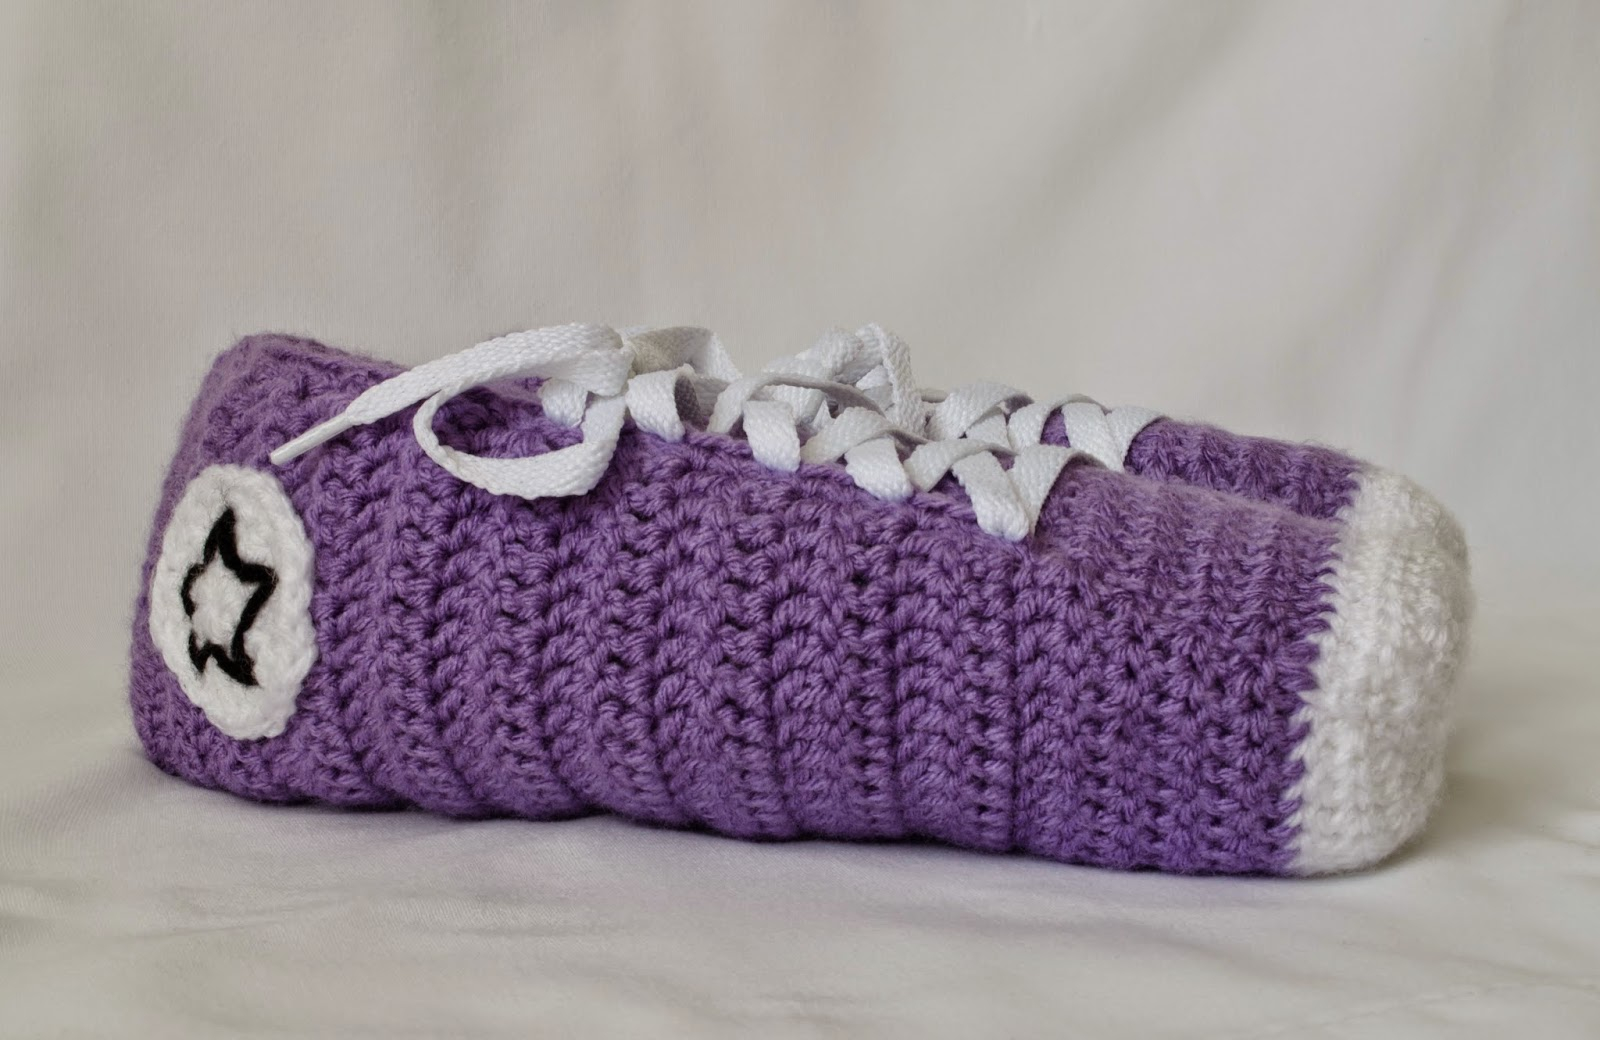 Converse Knitted Slippers Pattern Make All The Things Converse Slipper Crochet Pattern